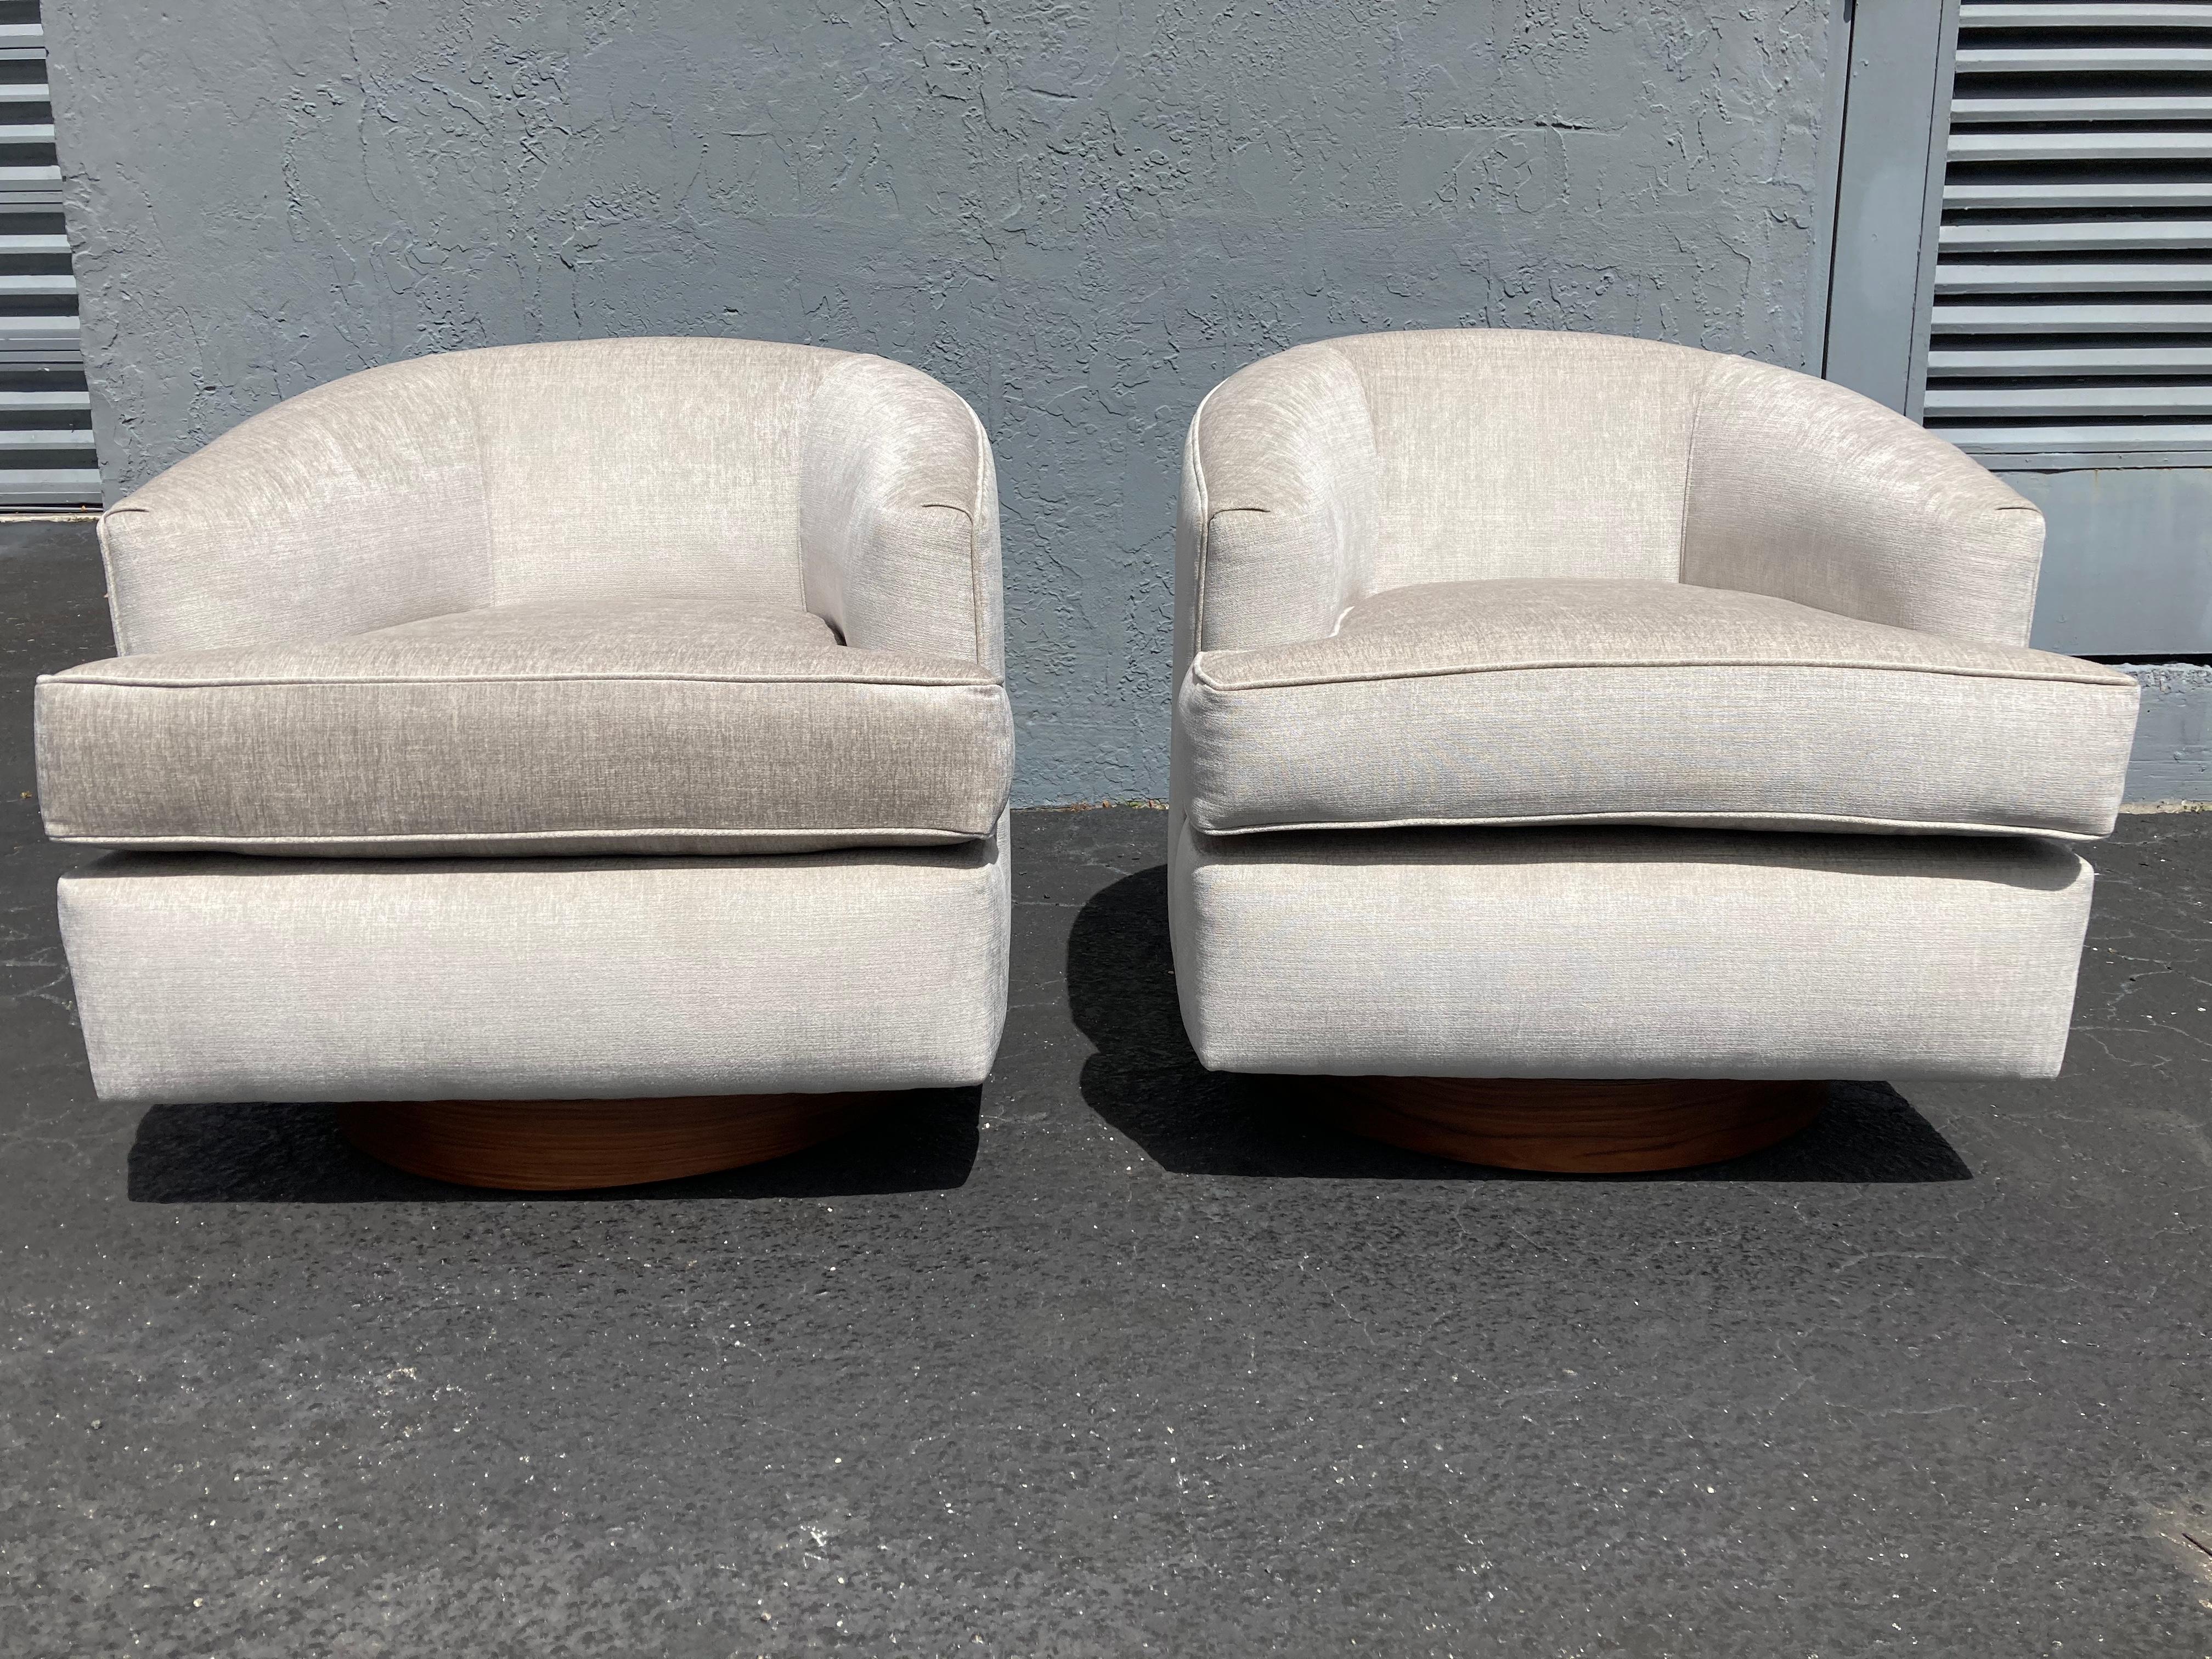 Beautiful pair of swivel Lounge chairs, reupholstered in Knoll Fabric. Rosewood veneered bases. Ready for a new home.